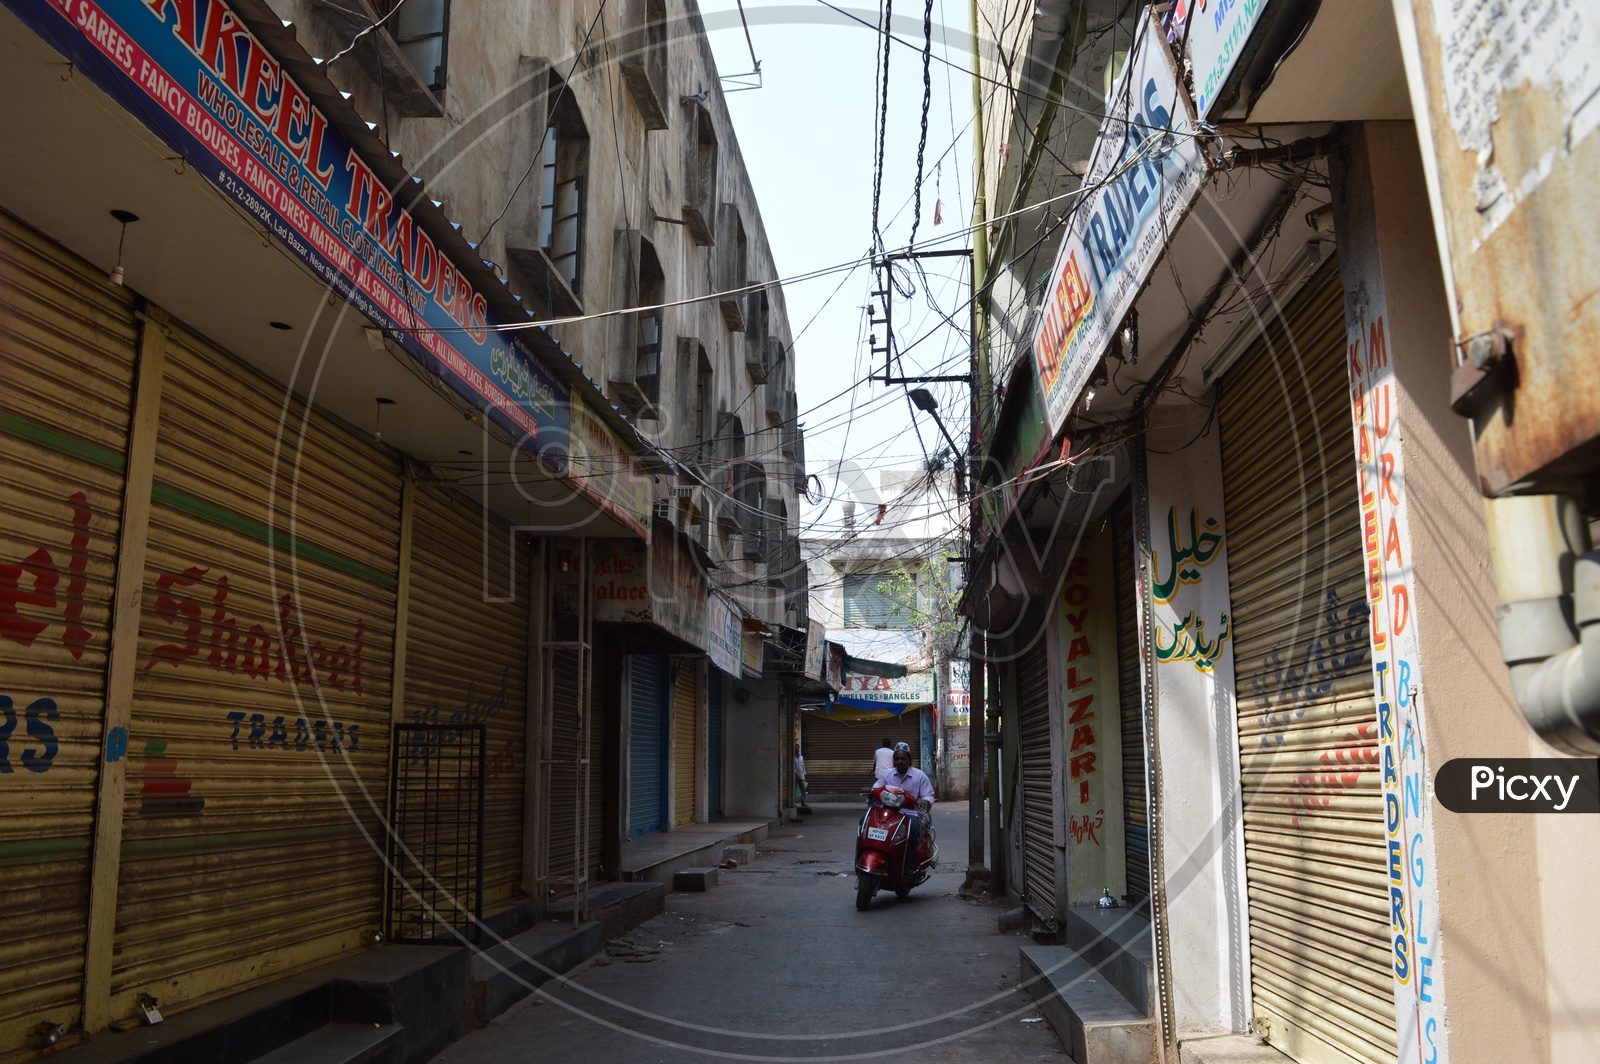 Streets Around Charminar With Shops Shut Closed